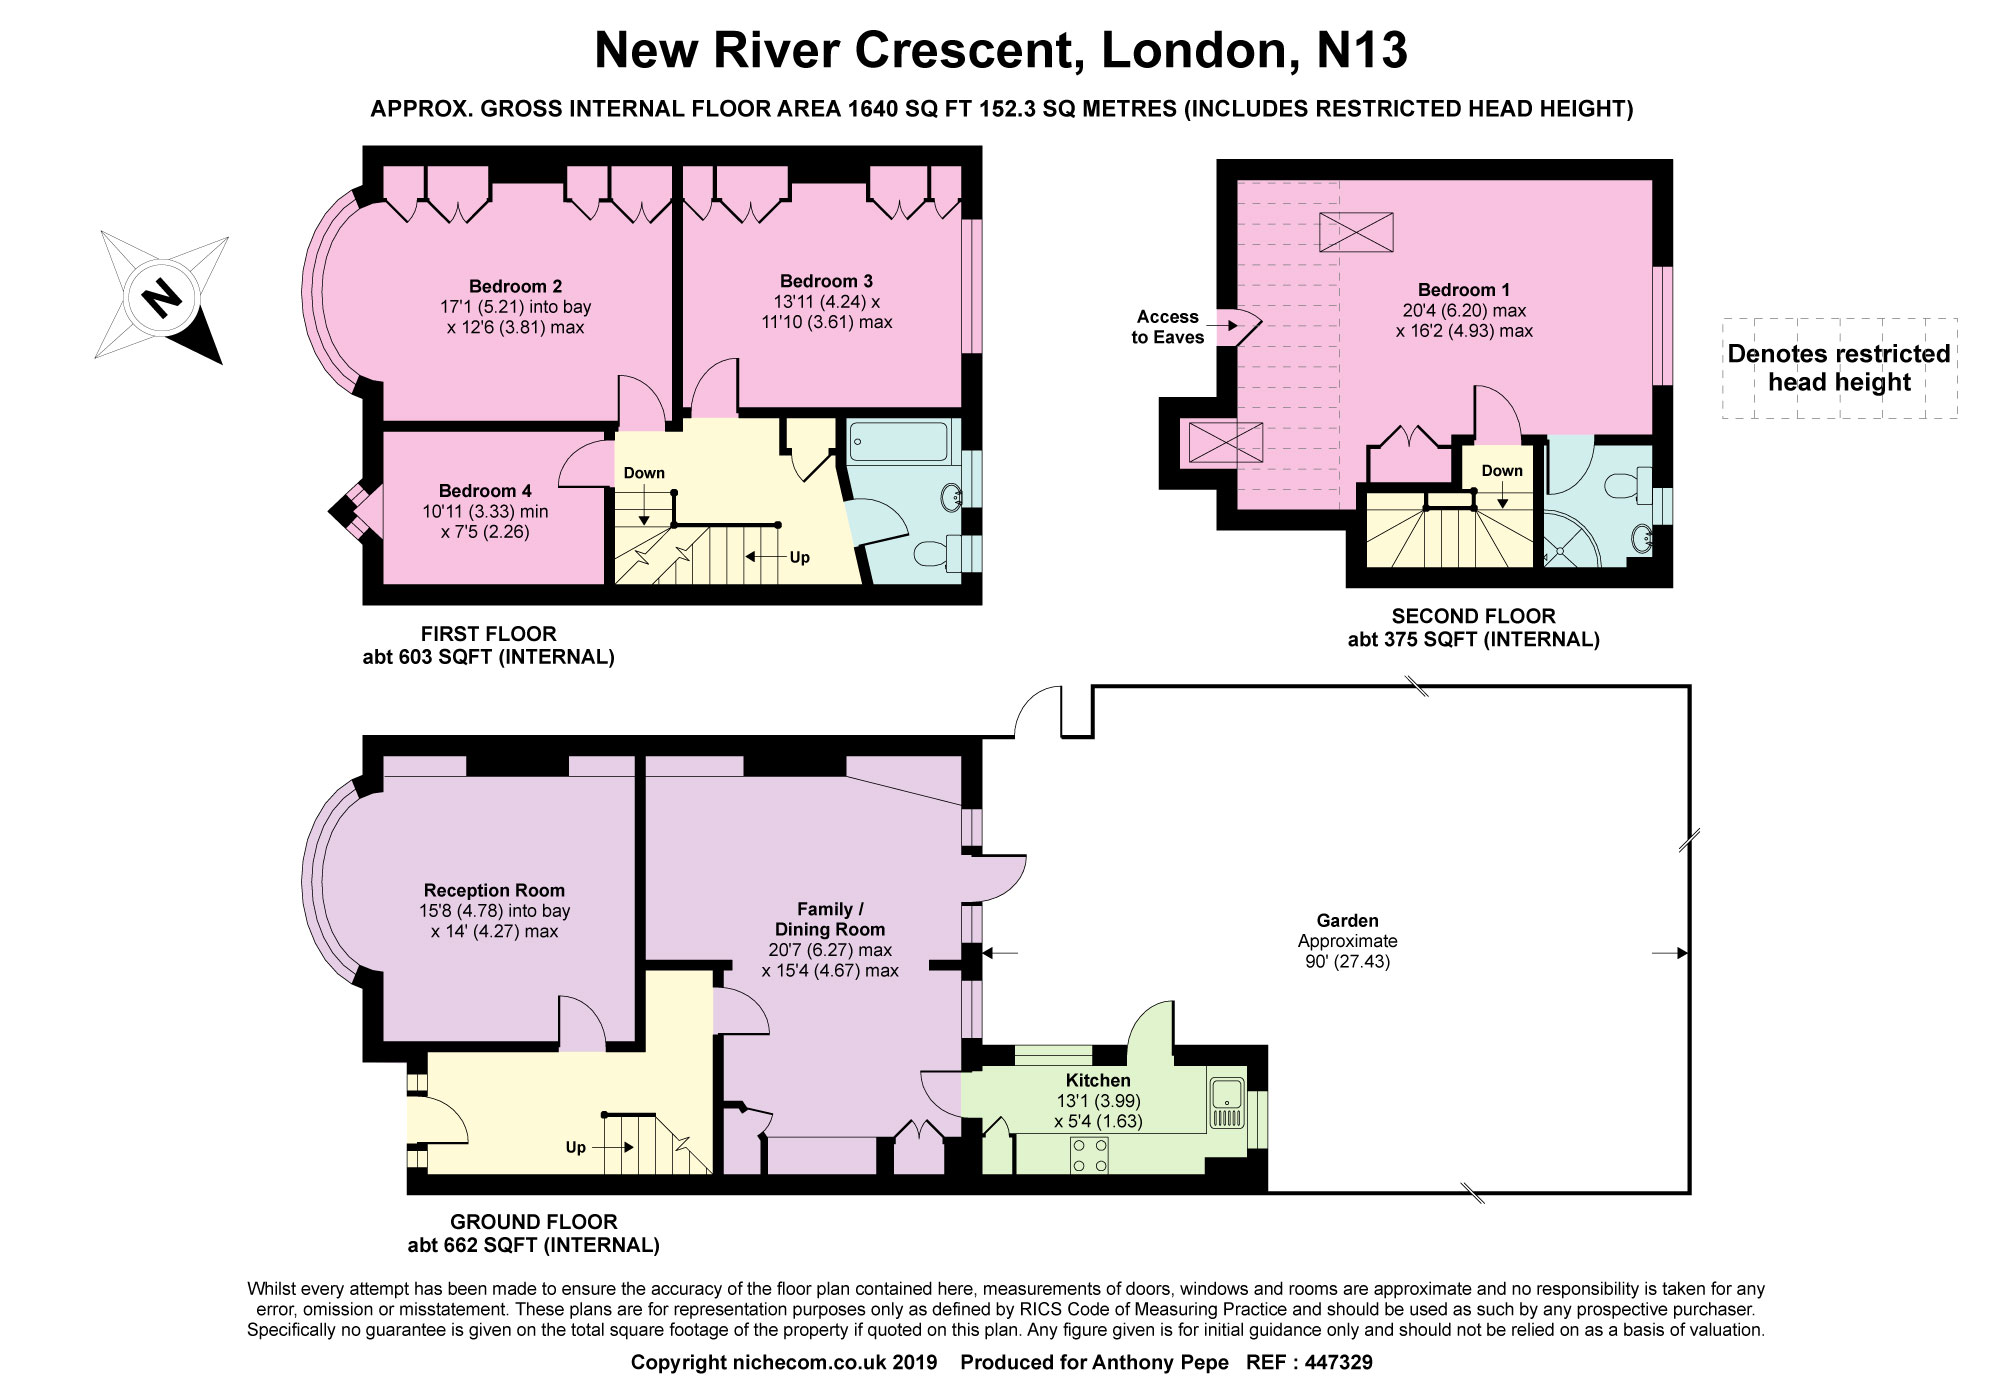 4 Bedrooms Semi-detached house for sale in New River Crescent, Palmers Green, London N13